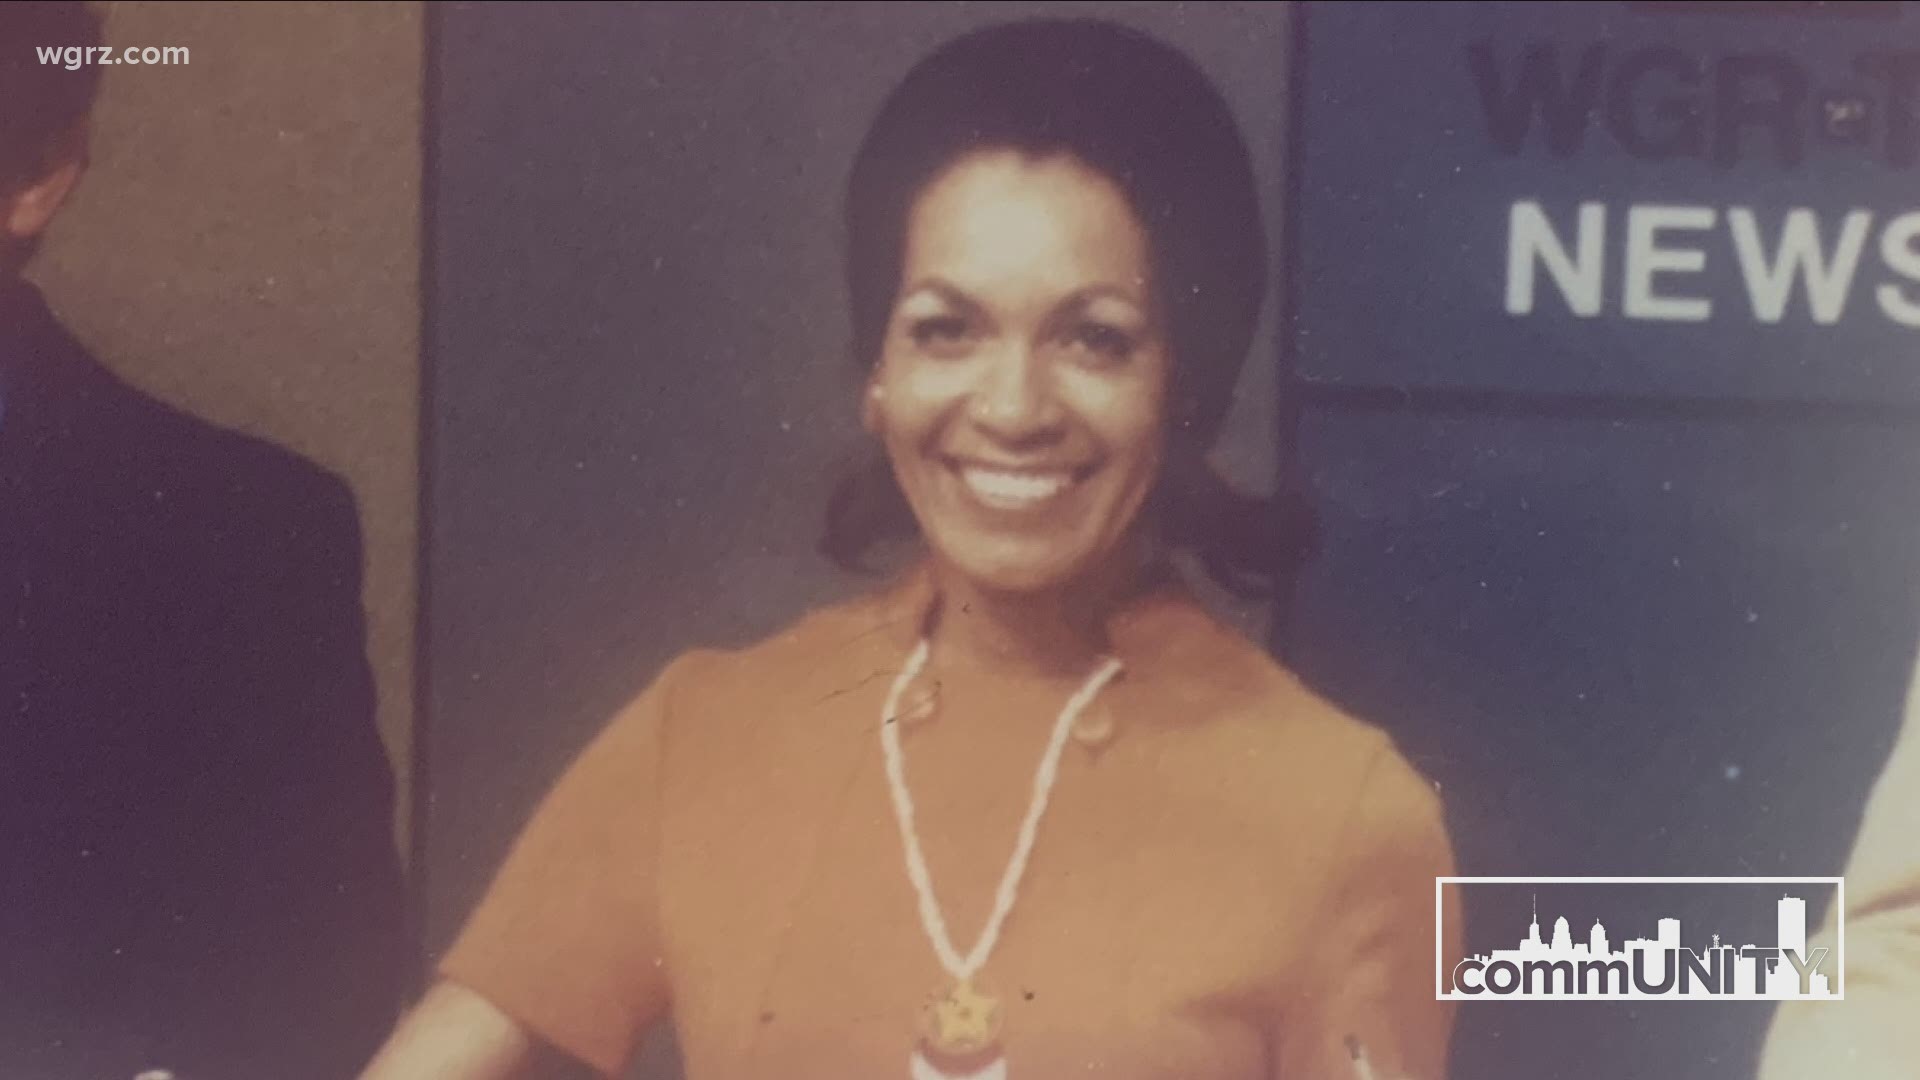 Storm Team 2 Meteorologist Elyse Smith reflects on this trailblazing meteorologist's story in this month's episode of commUNITY.